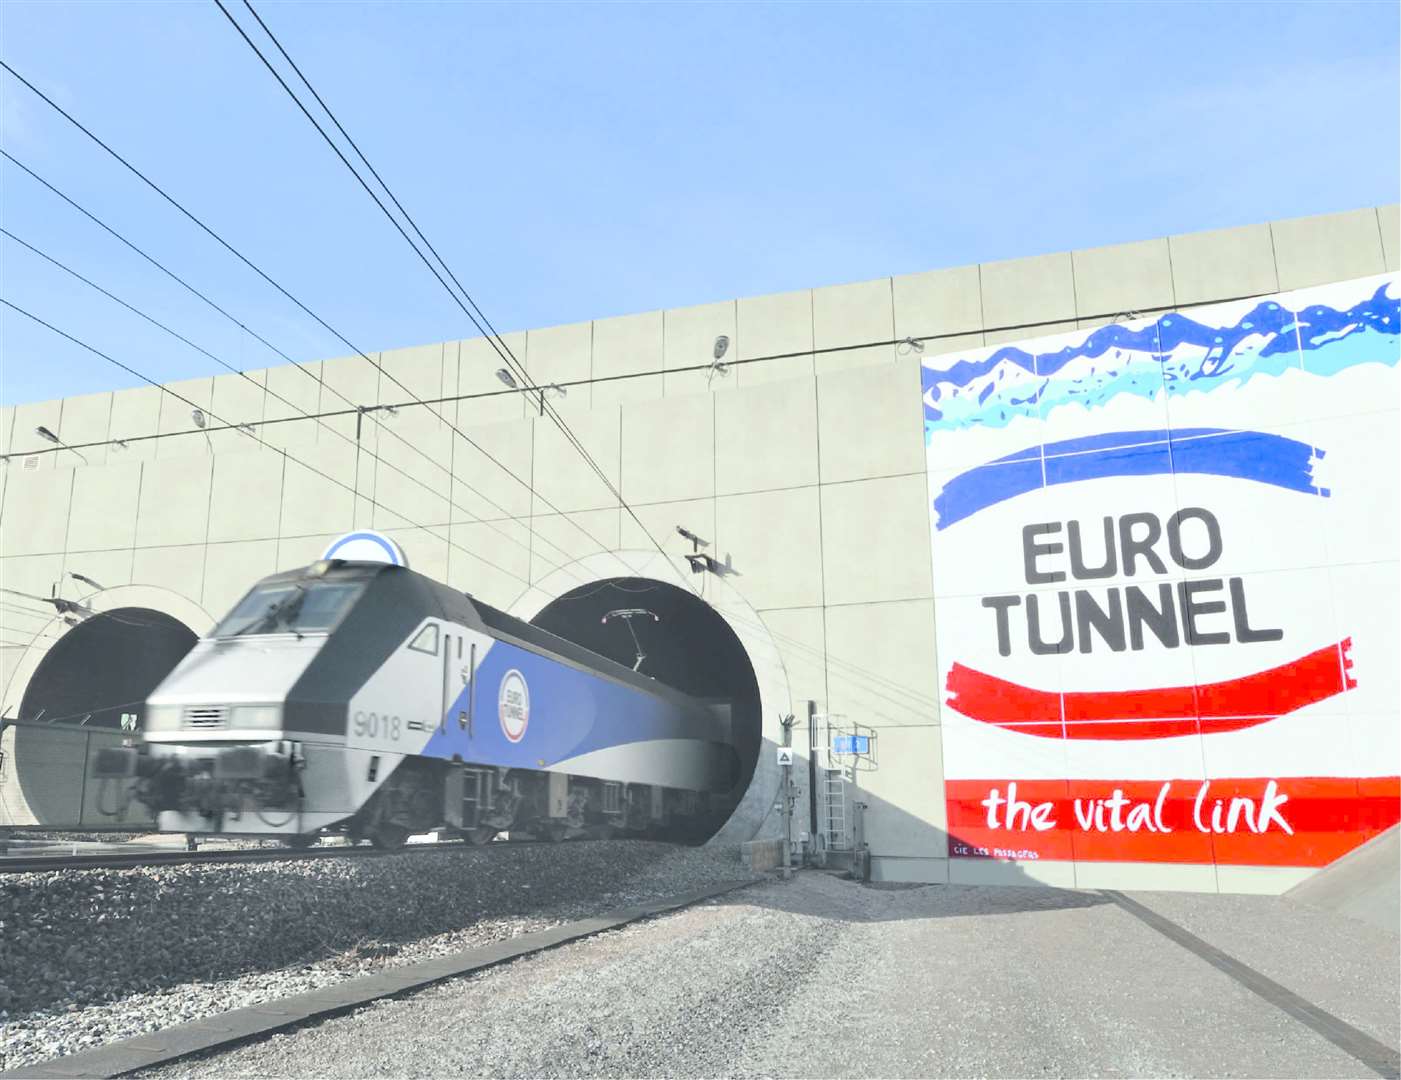 Eurotunnel has seen freight traffic return to pre-Covid levels - but tourist traffic is still way down on last year